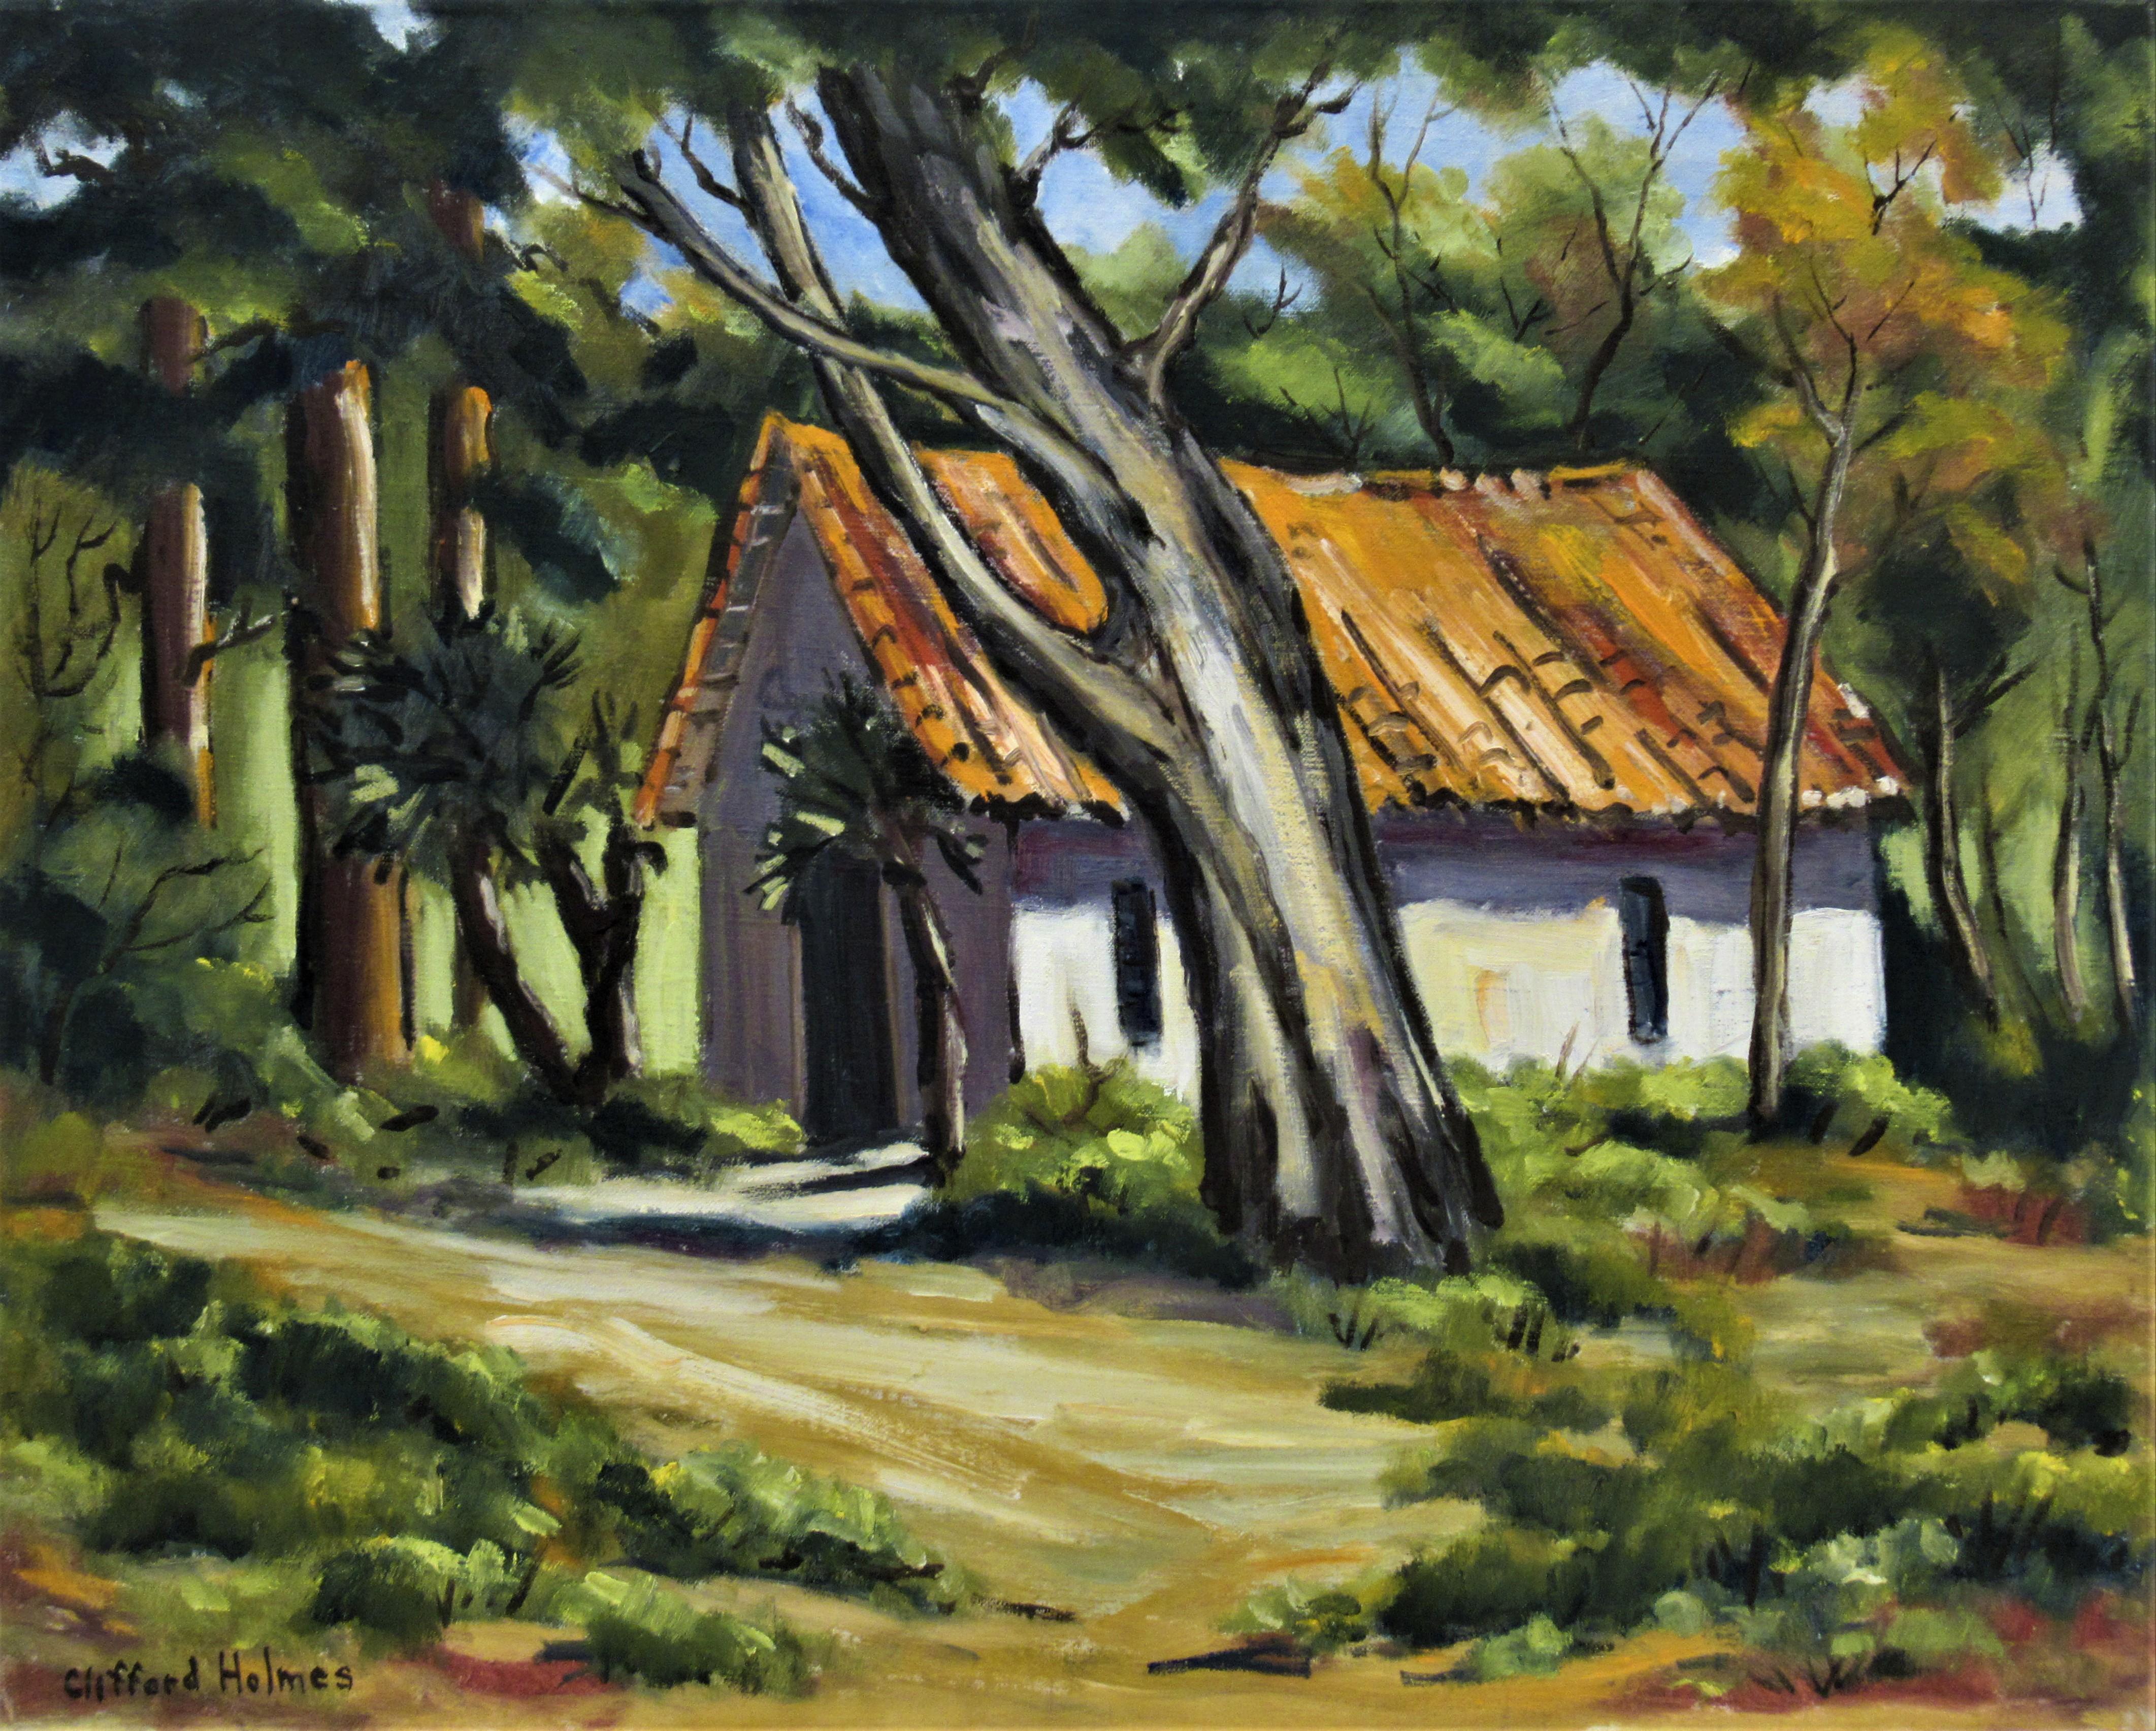 Clifford Holmes Landscape Painting - Nile Adobe House